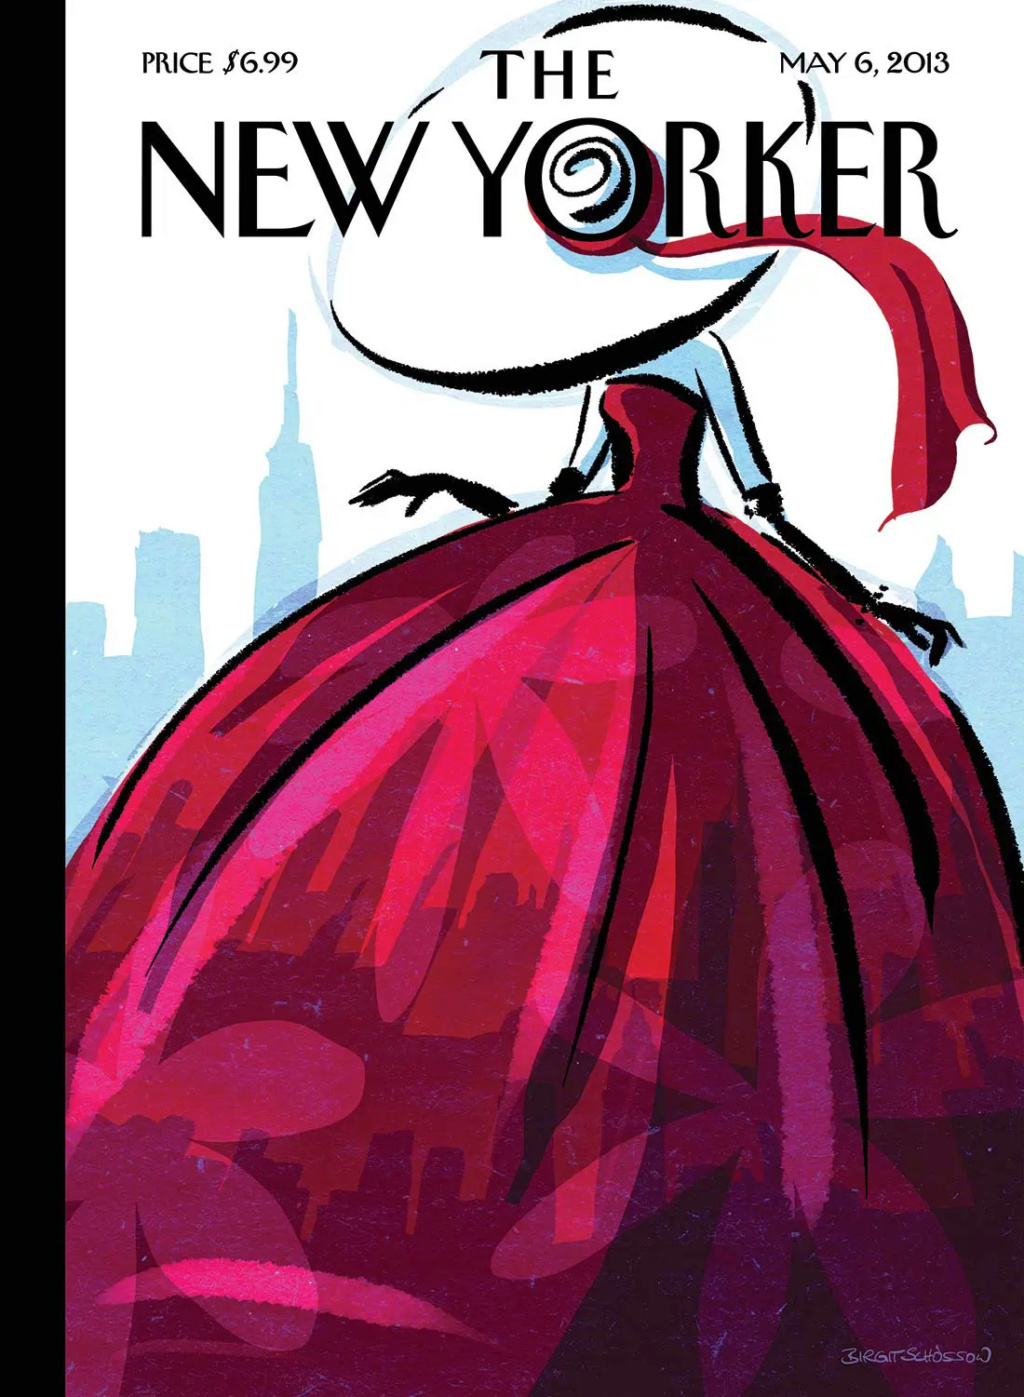 The New Yorker : Les couvertures - Page 4 A_web120